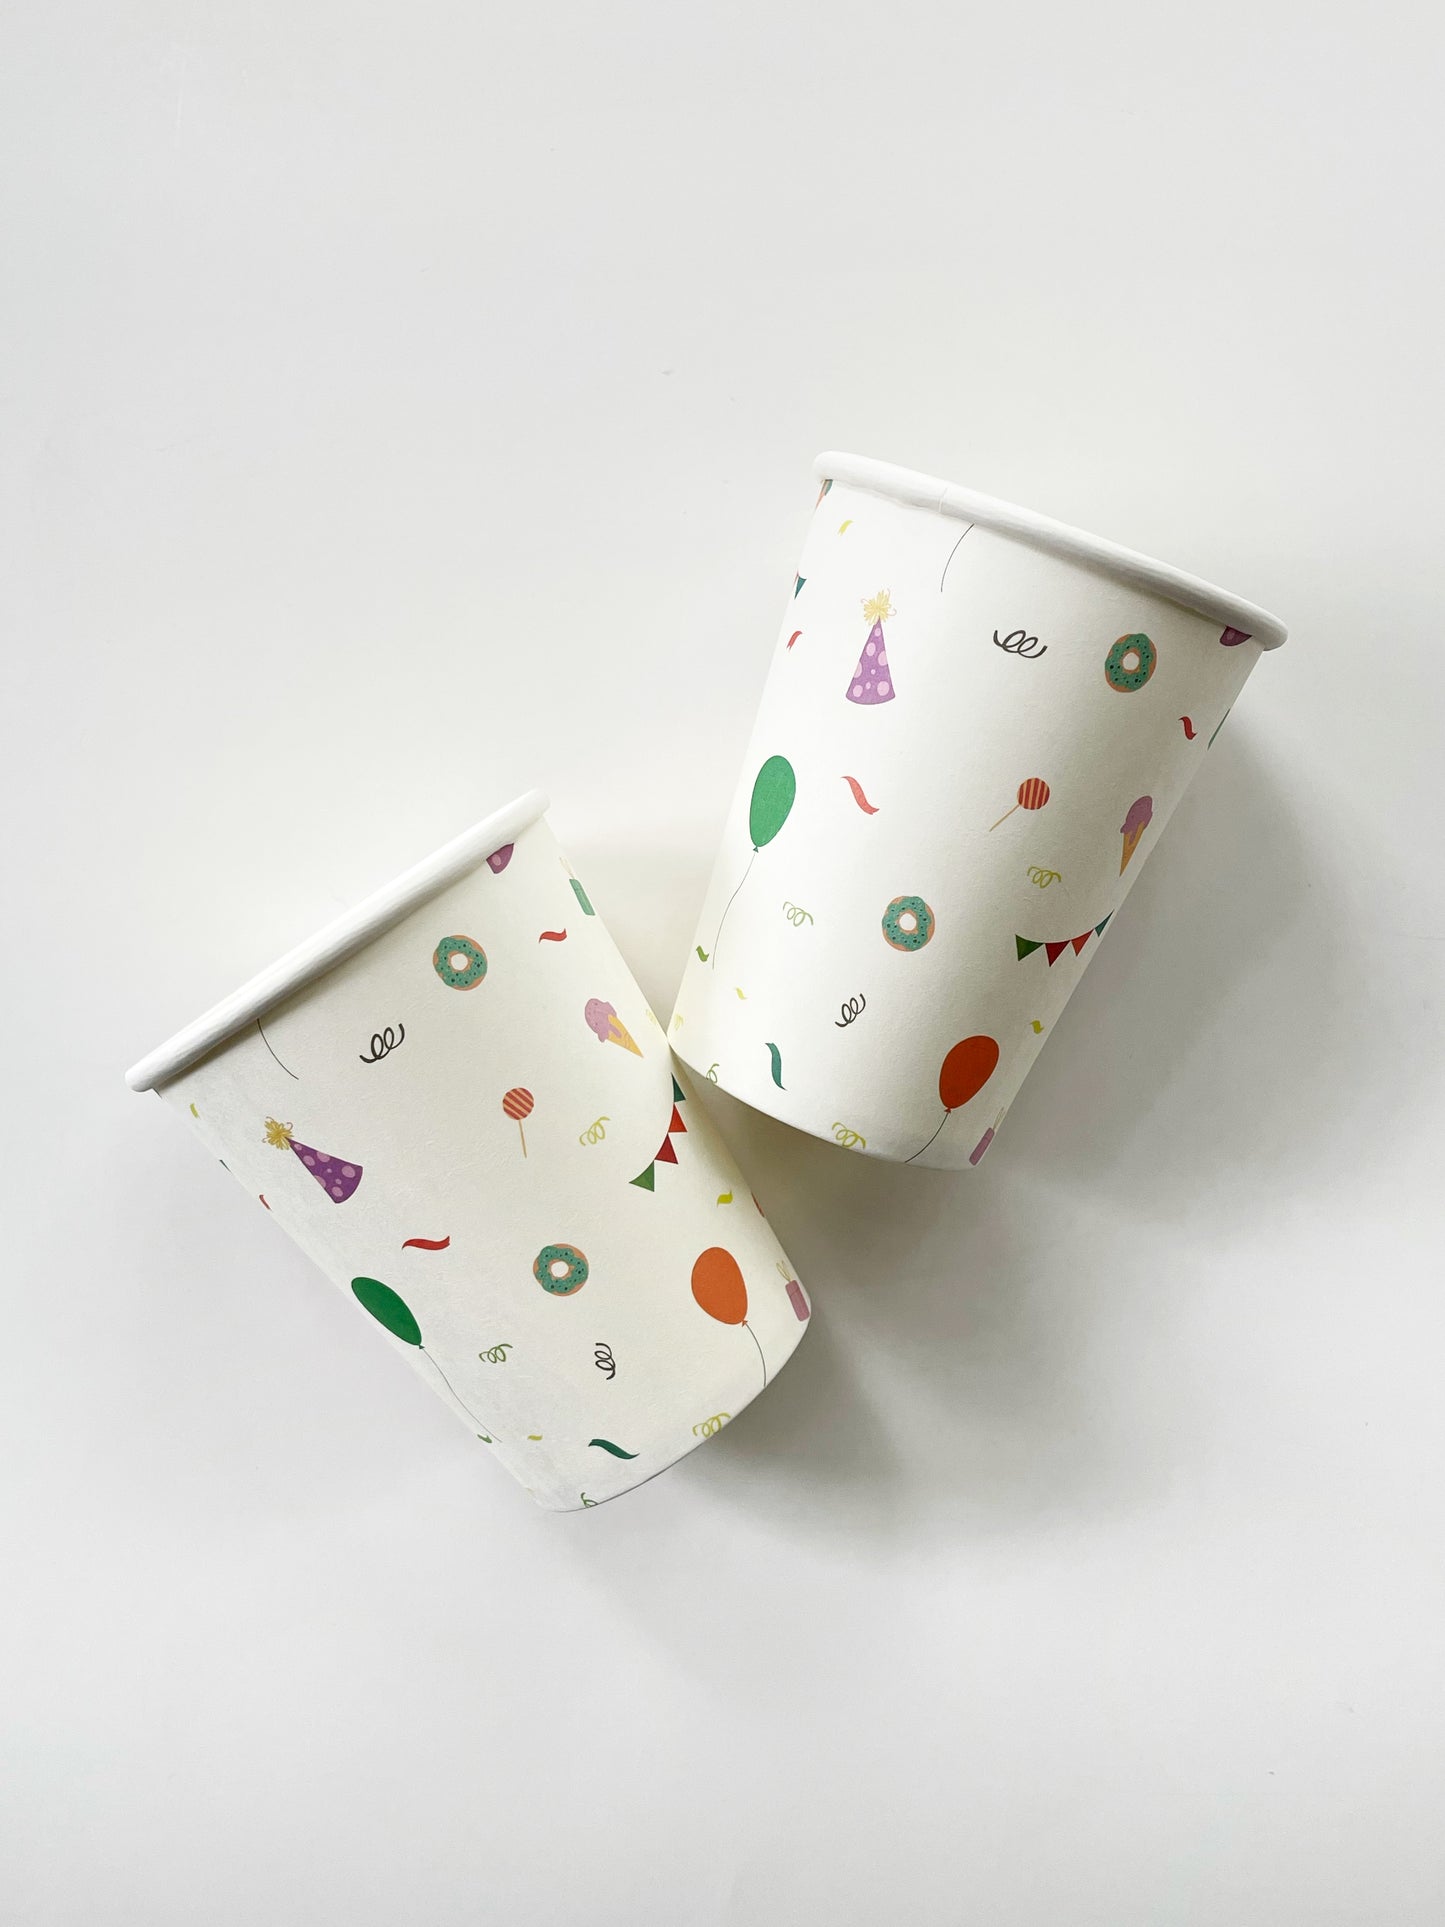 The Celebration paper party cups feature green, orange and blue balloons, ice cream cones, party hats, party garlands, birthday gifts and donuts.